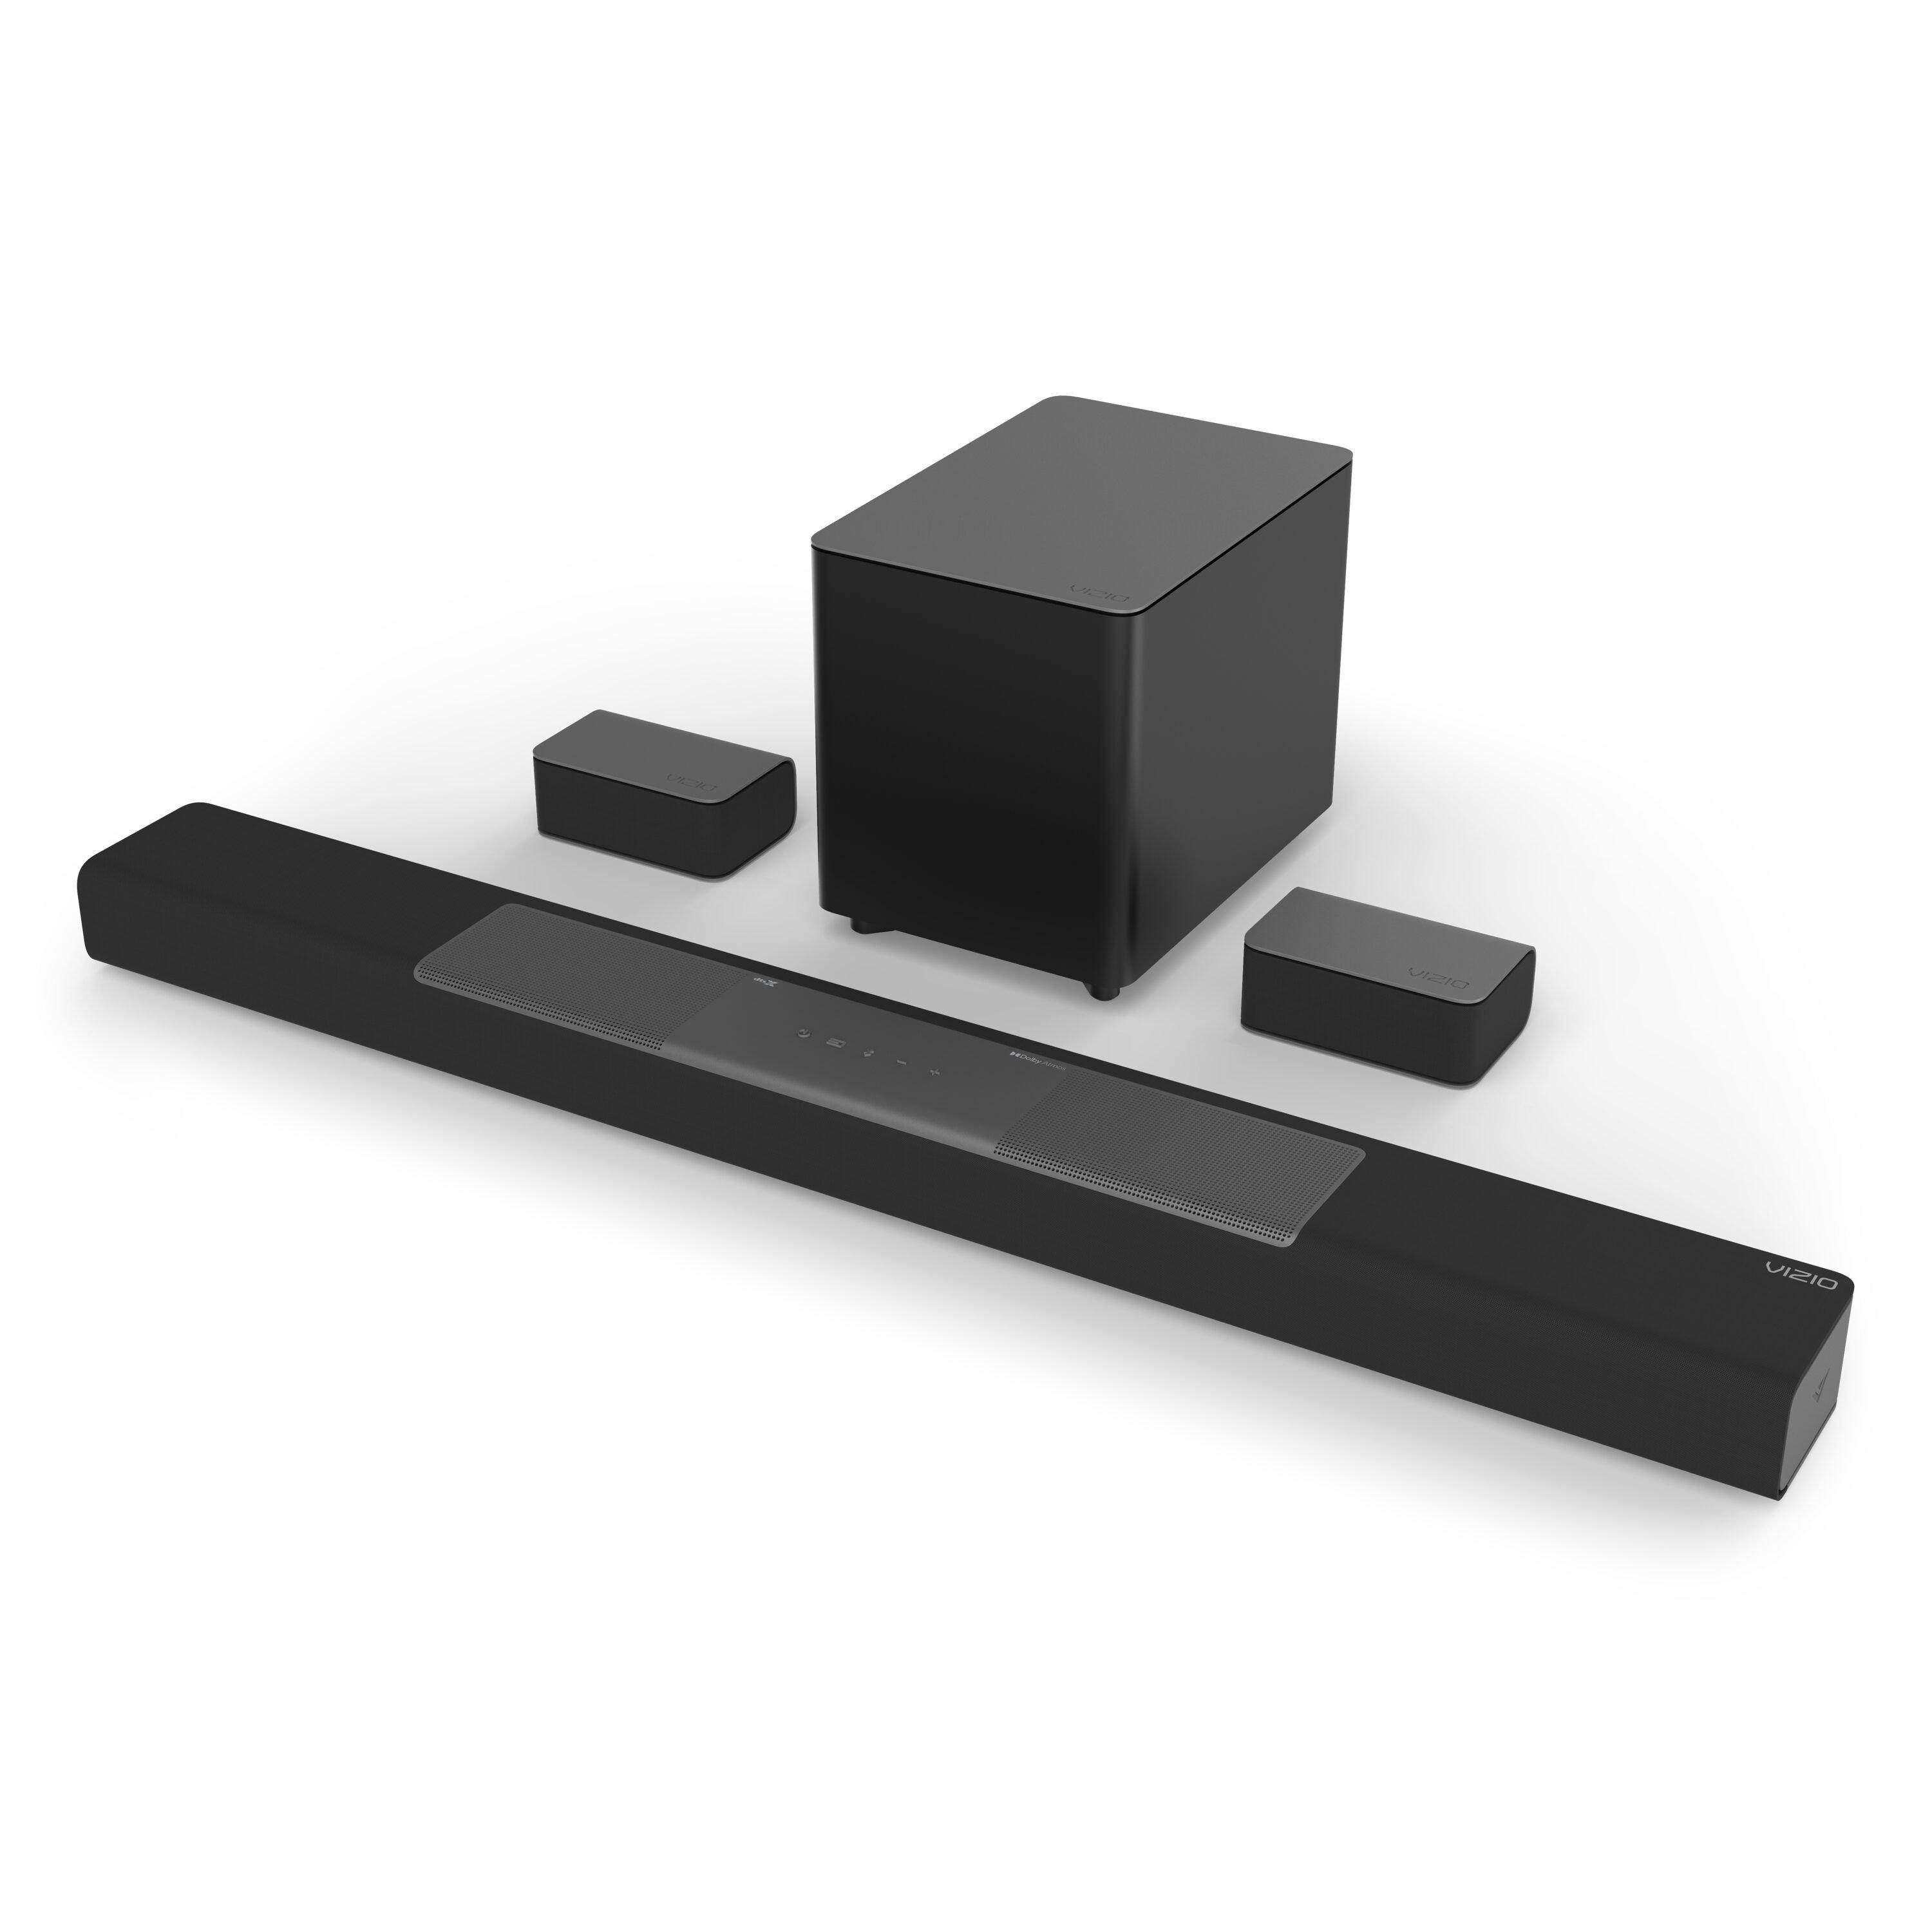 VIZIO M-Series 5.1.2 Sound Bar and Home Theater Sound System with Dolby Atmos and DTSX Black M512A-H6